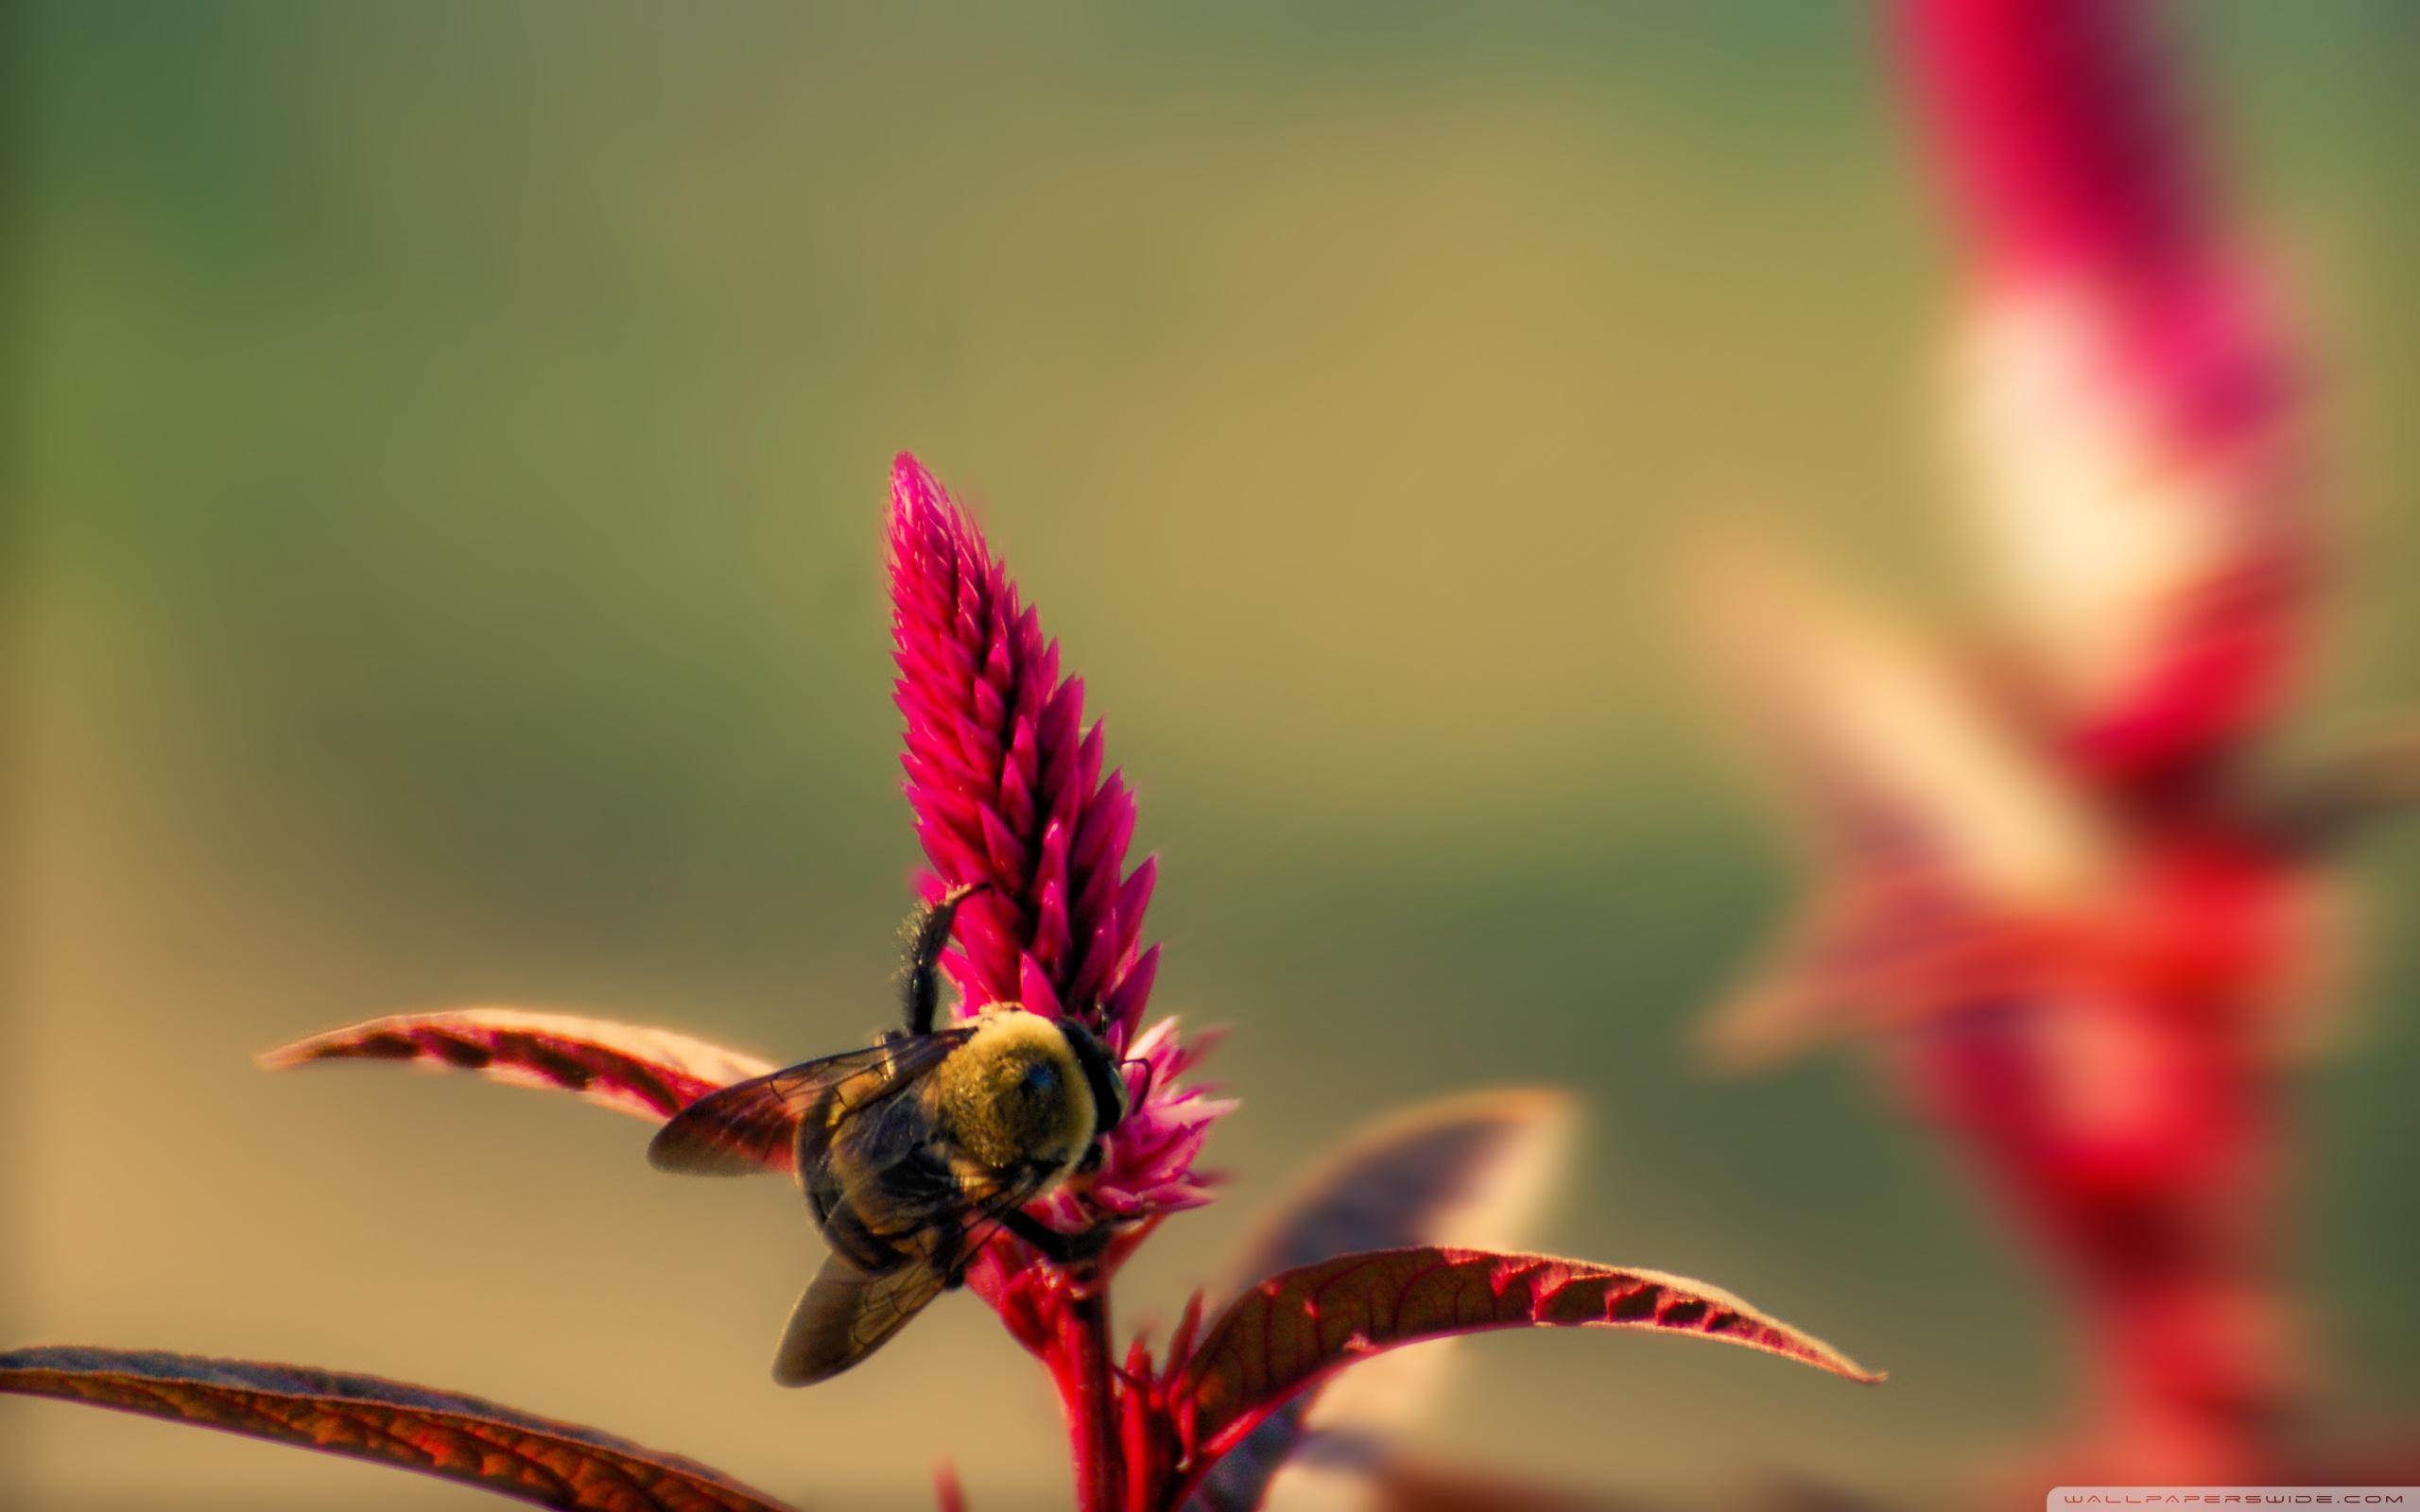 Bumble Bee Insect ❤ 4K HD Desktop Wallpaper for 4K Ultra HD TV